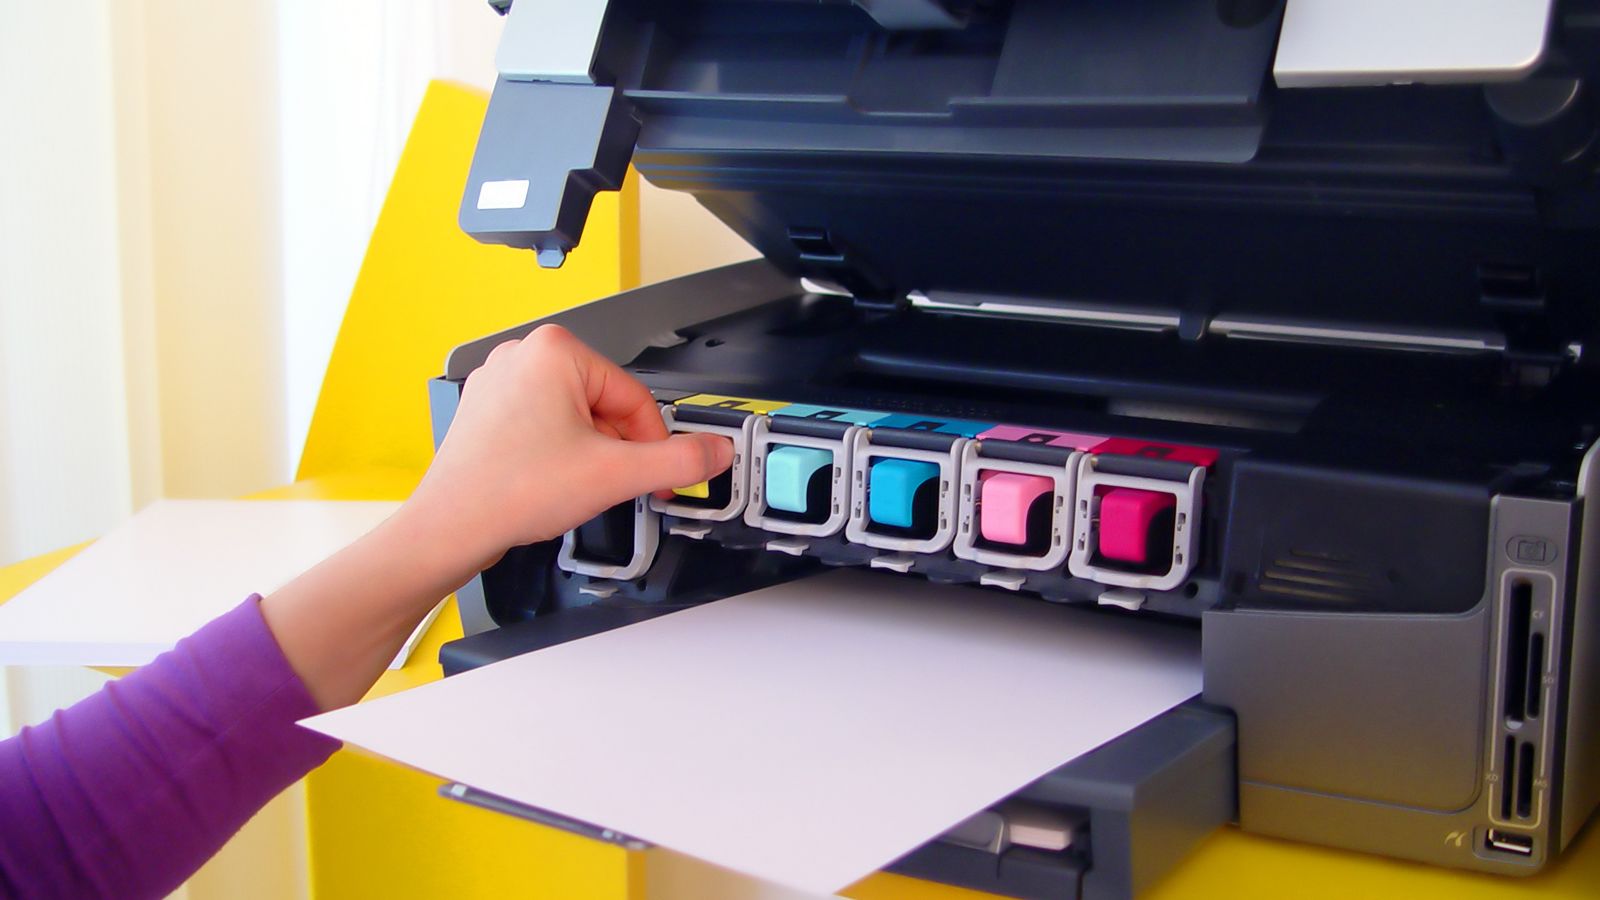 HP Faces Class Action Lawsuit Over Printer Firmware Updates Limiting Ink Choices